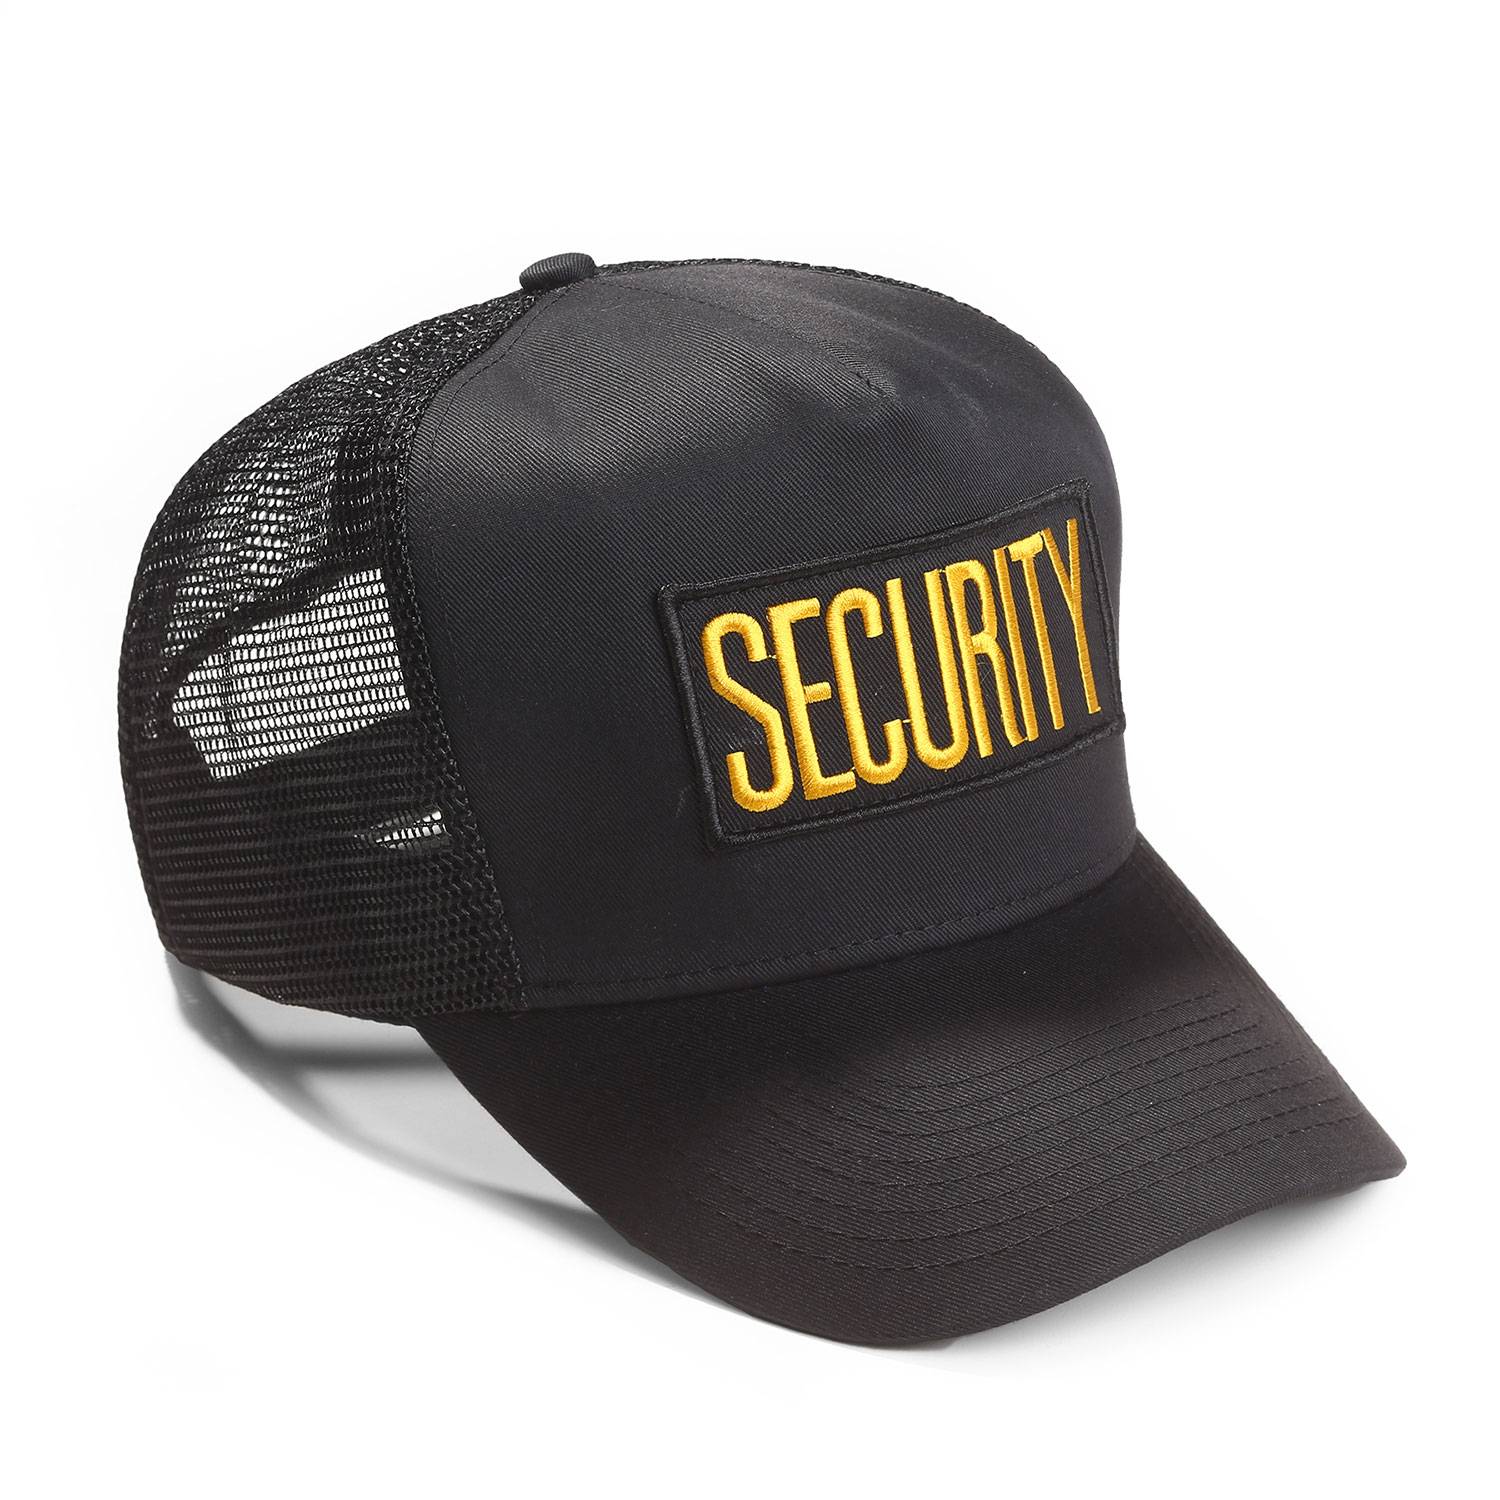 LAWPRO SUMMER WEIGHT CAP WITH SECURITY